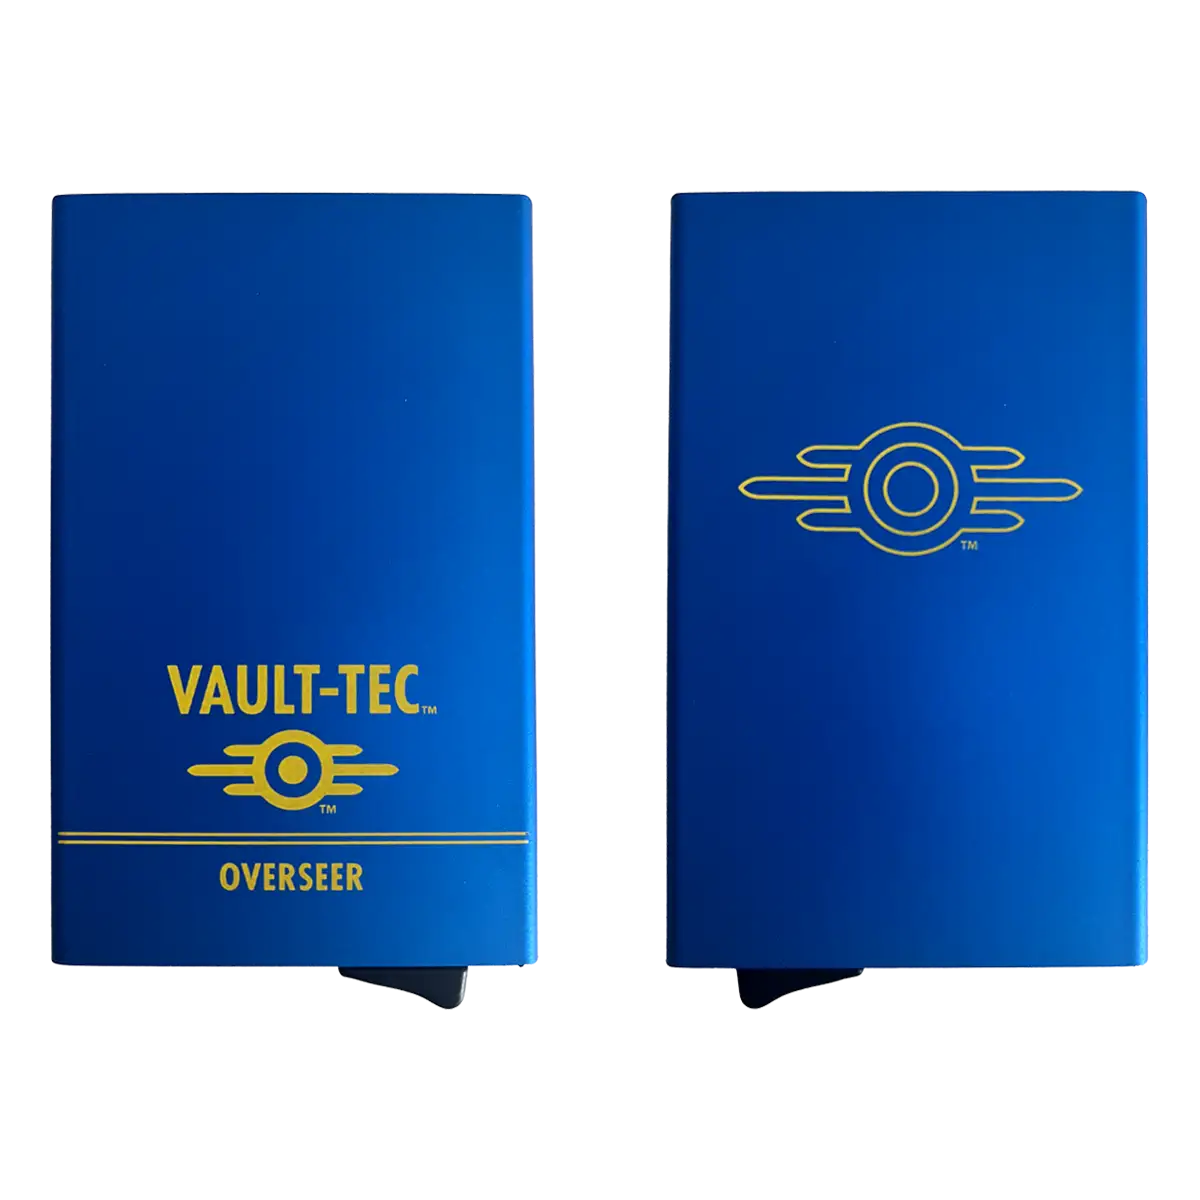 Fallout Credit Card Holder "Overseer"